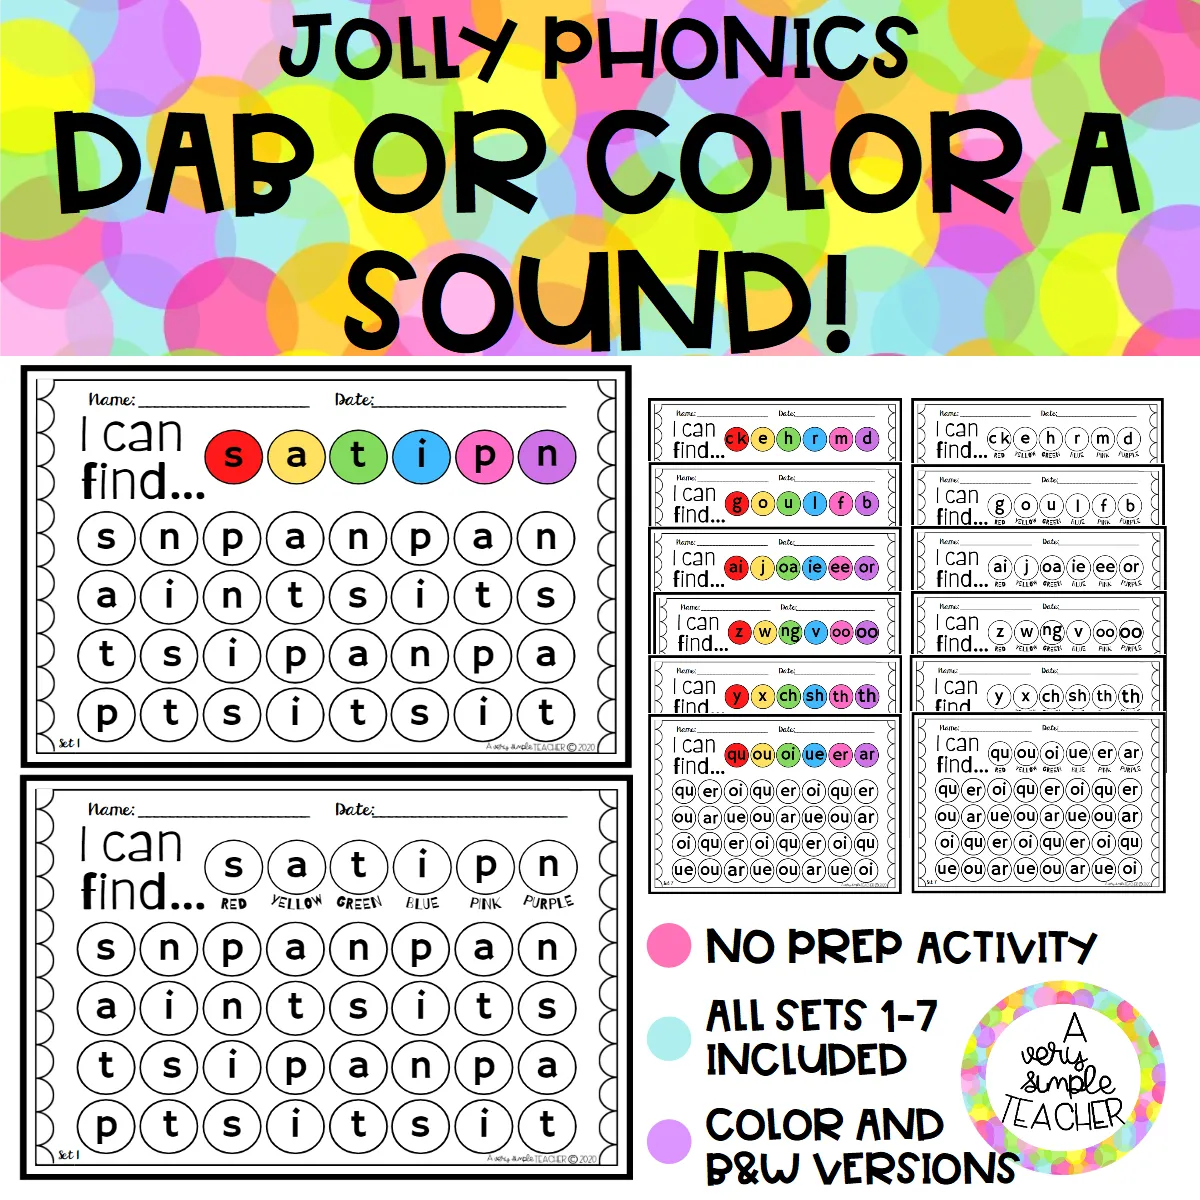 JOLLY PHONICS Dab or color a sound WORKSHEETS (No prep activity)